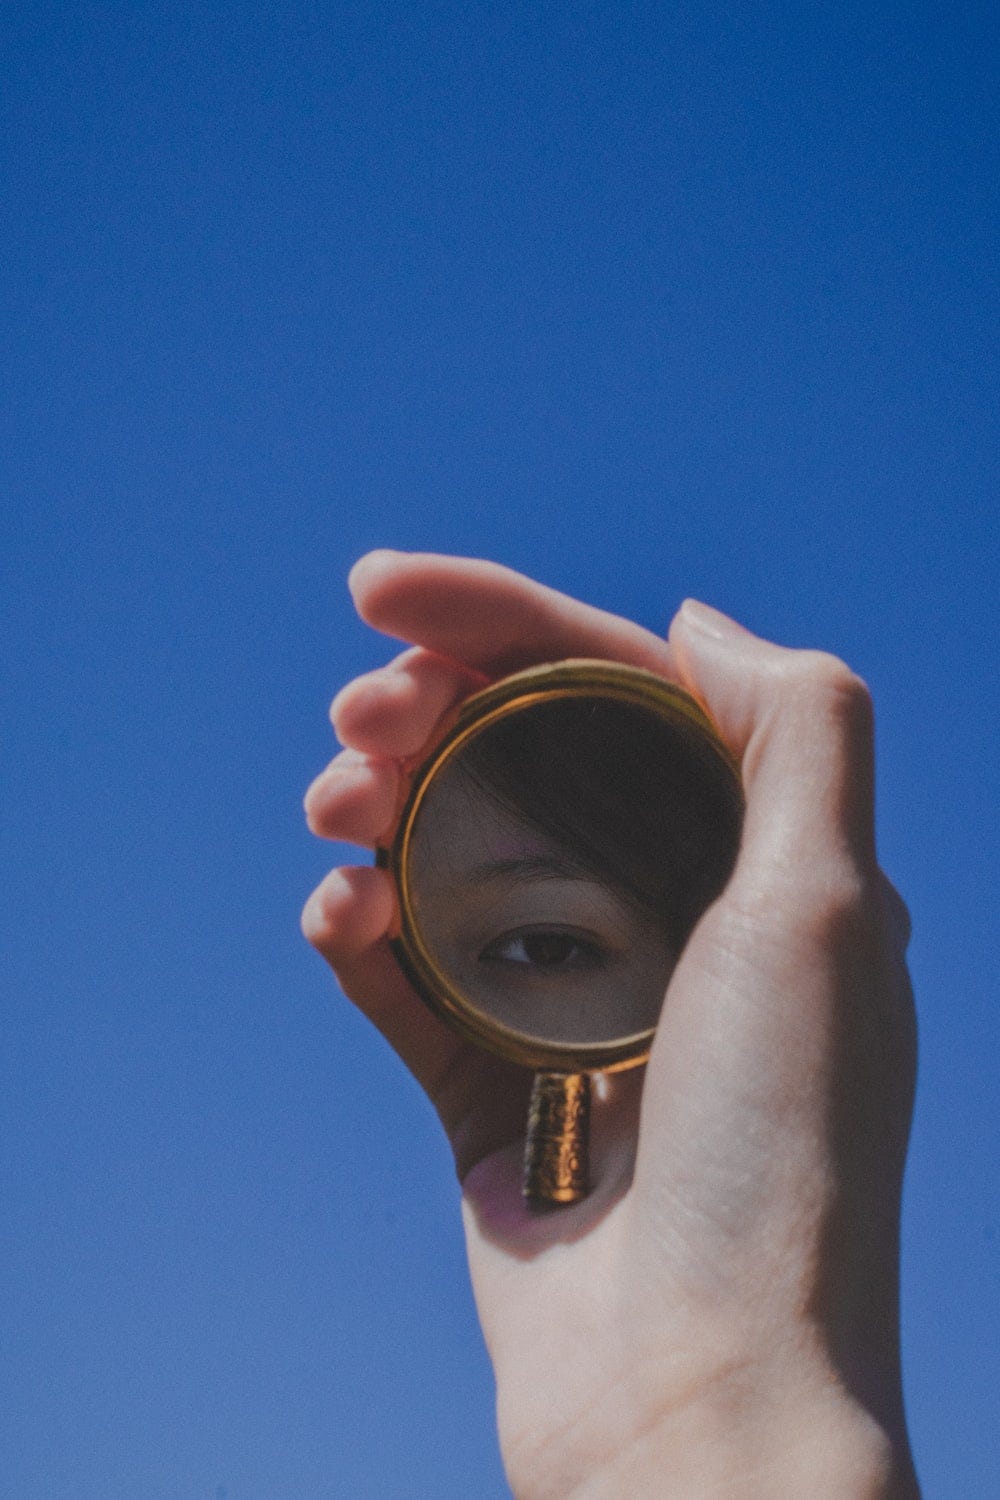 Woman holds up small mirror against blue sky. Her brown hair and a brown eye is shown in the reflection.